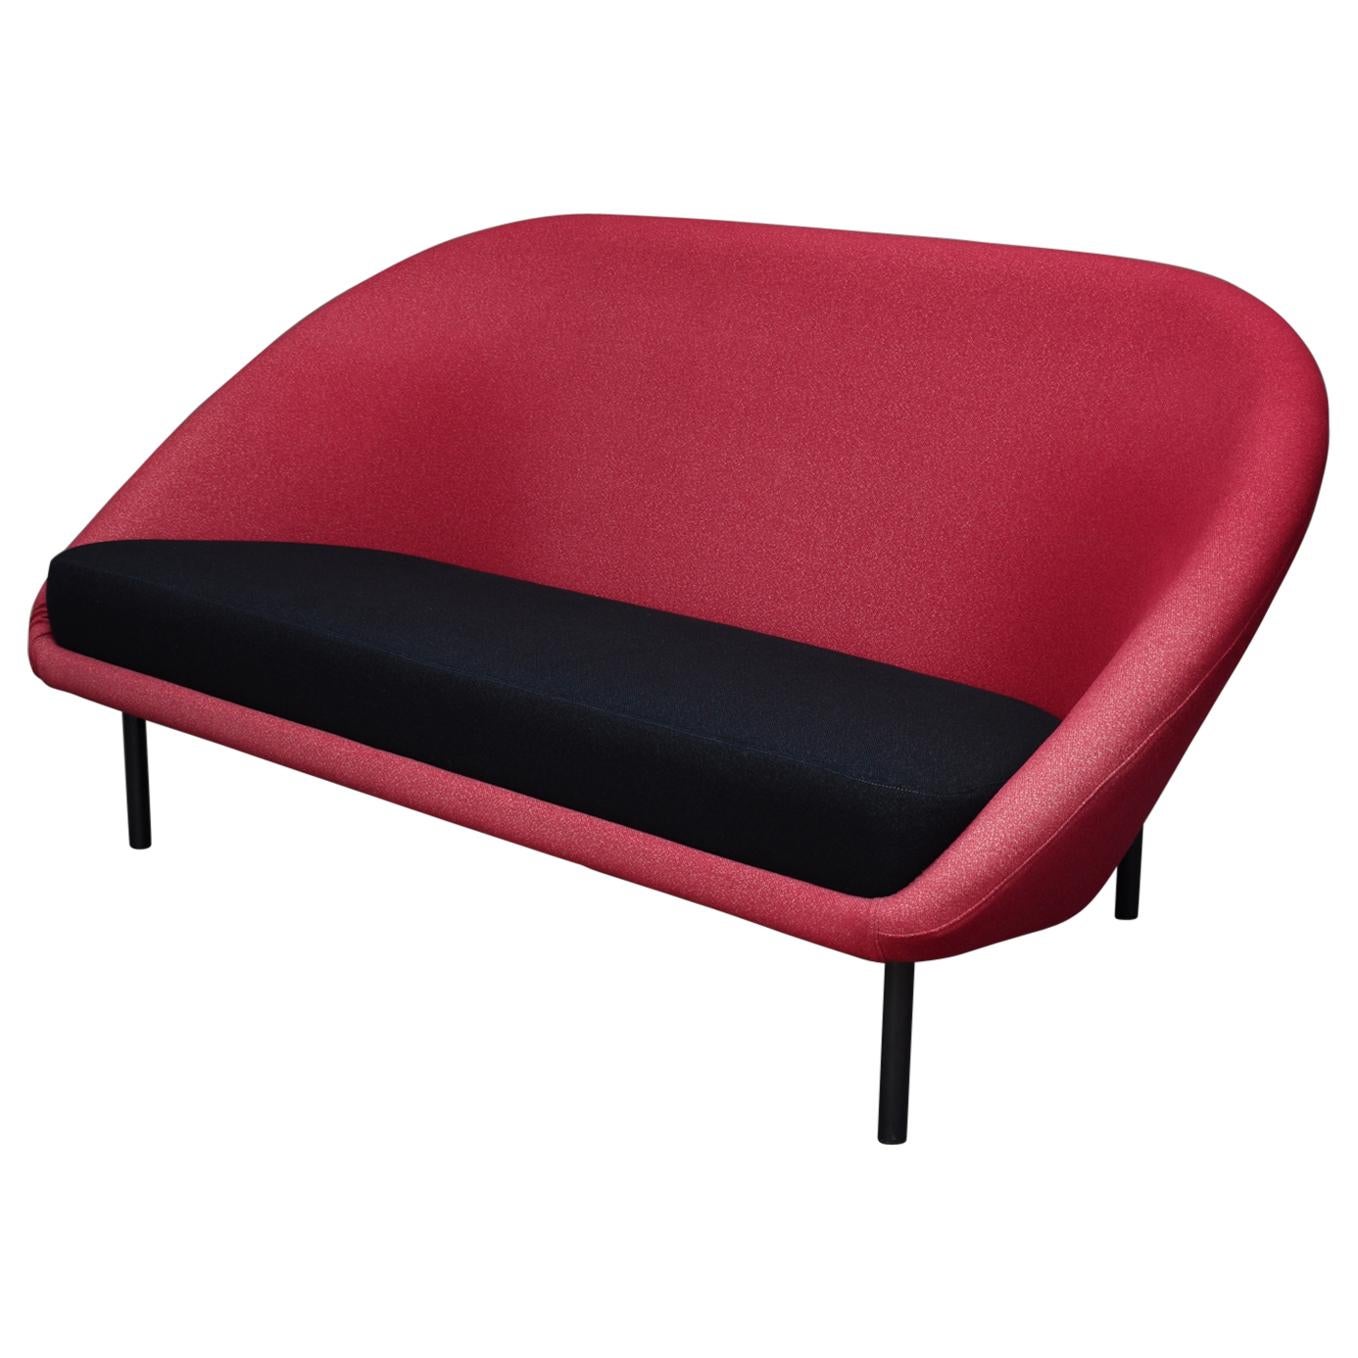 Theo Ruth f815 Sofa by Artifort, Netherlands, 1958 For Sale